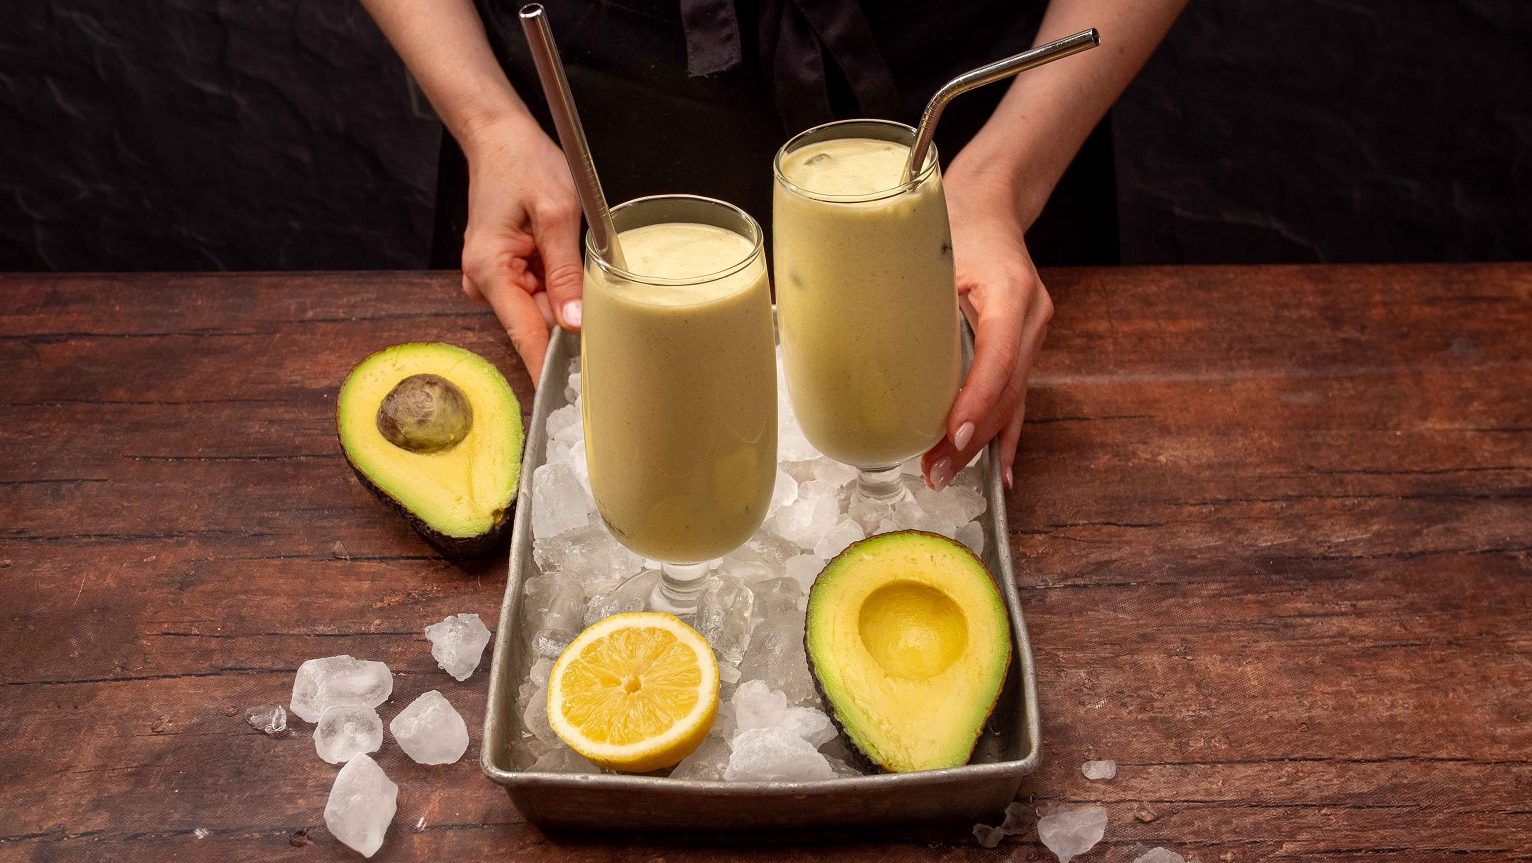 Two glasses of creamy drinks on iced tray with lemon and avocado halves.